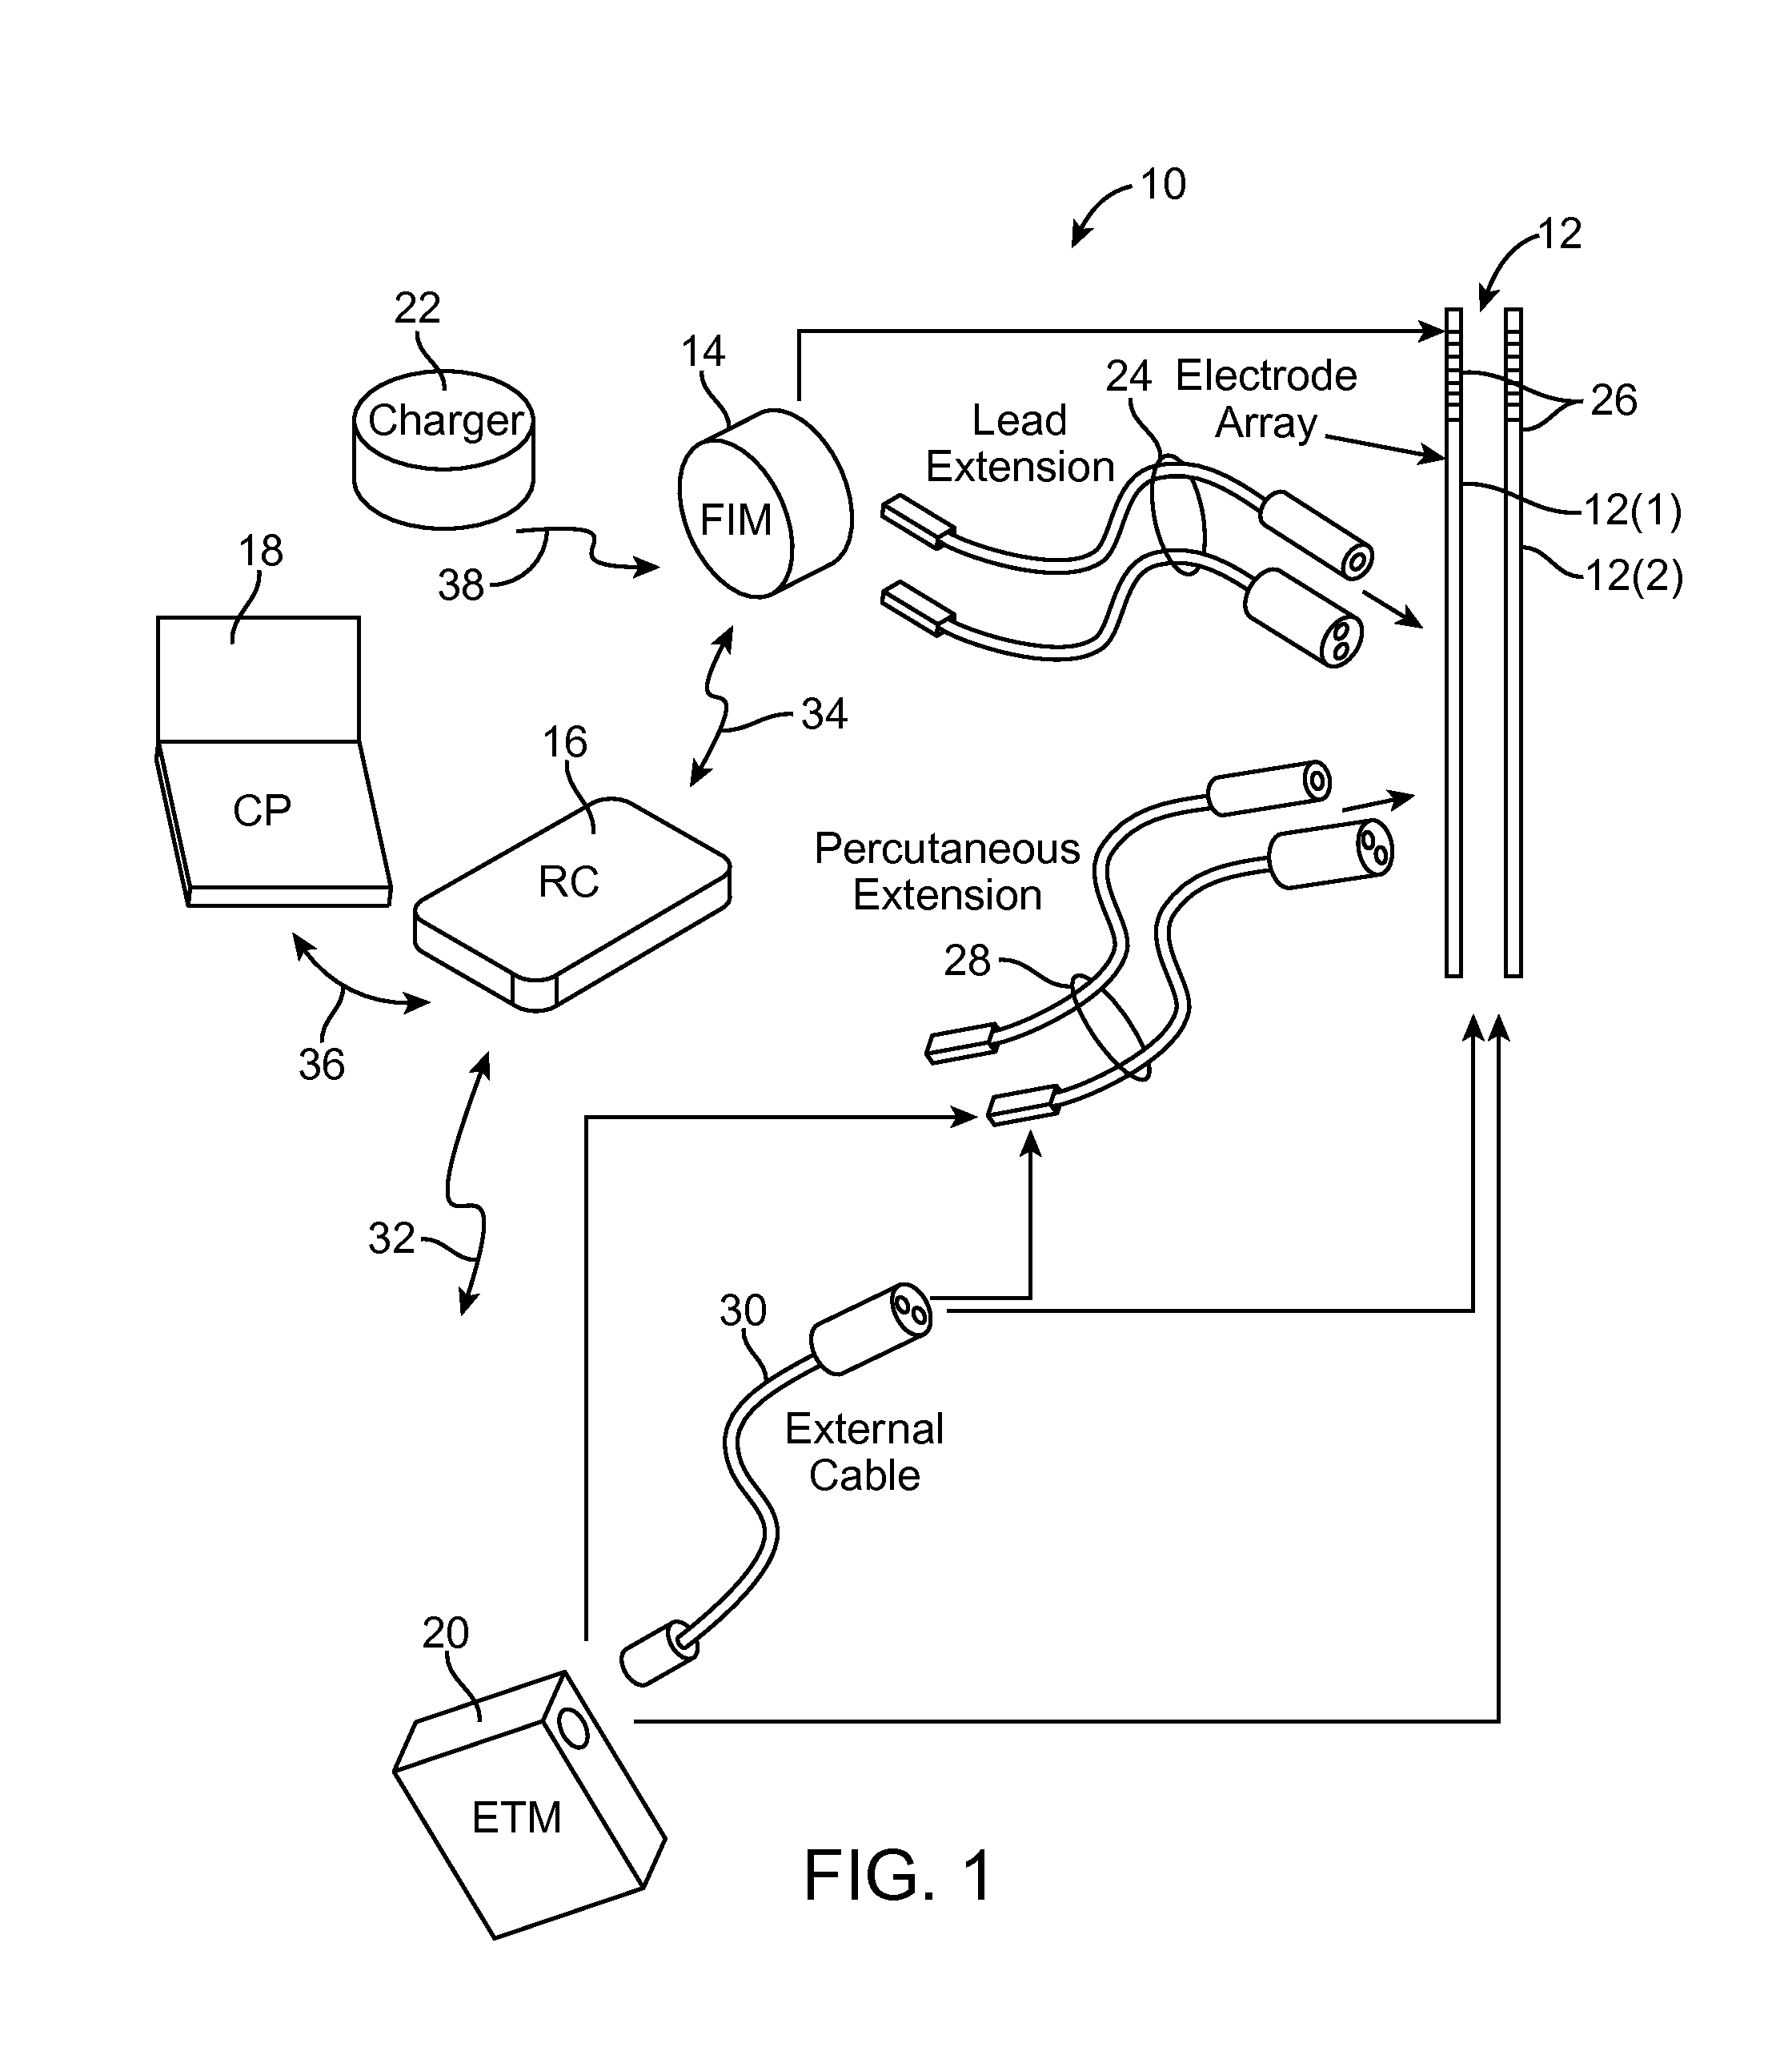 System and method for shaped phased current delivery